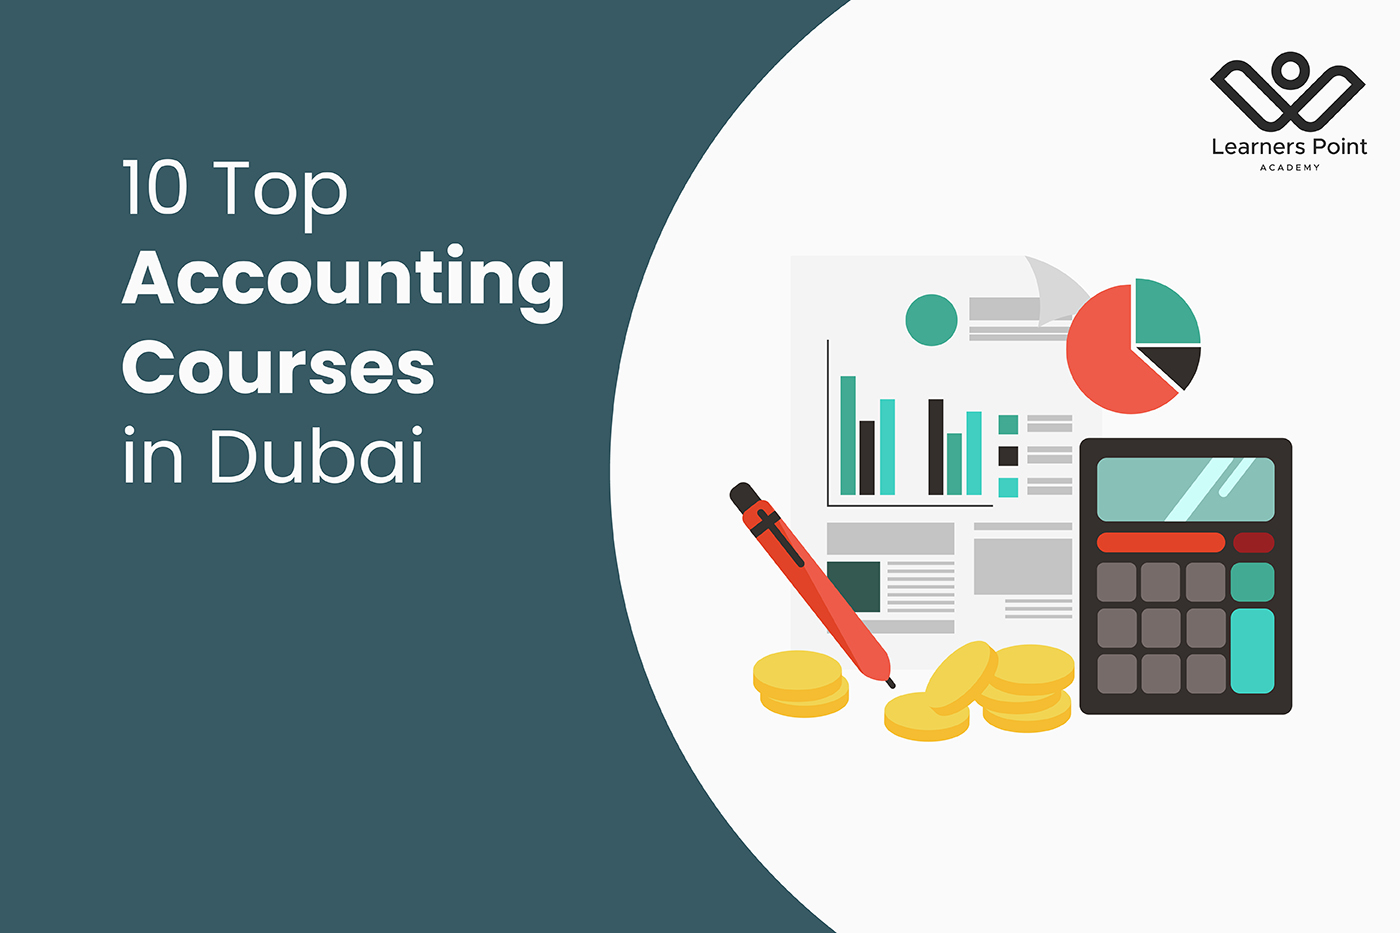 10 Top Accounting Courses in Dubai